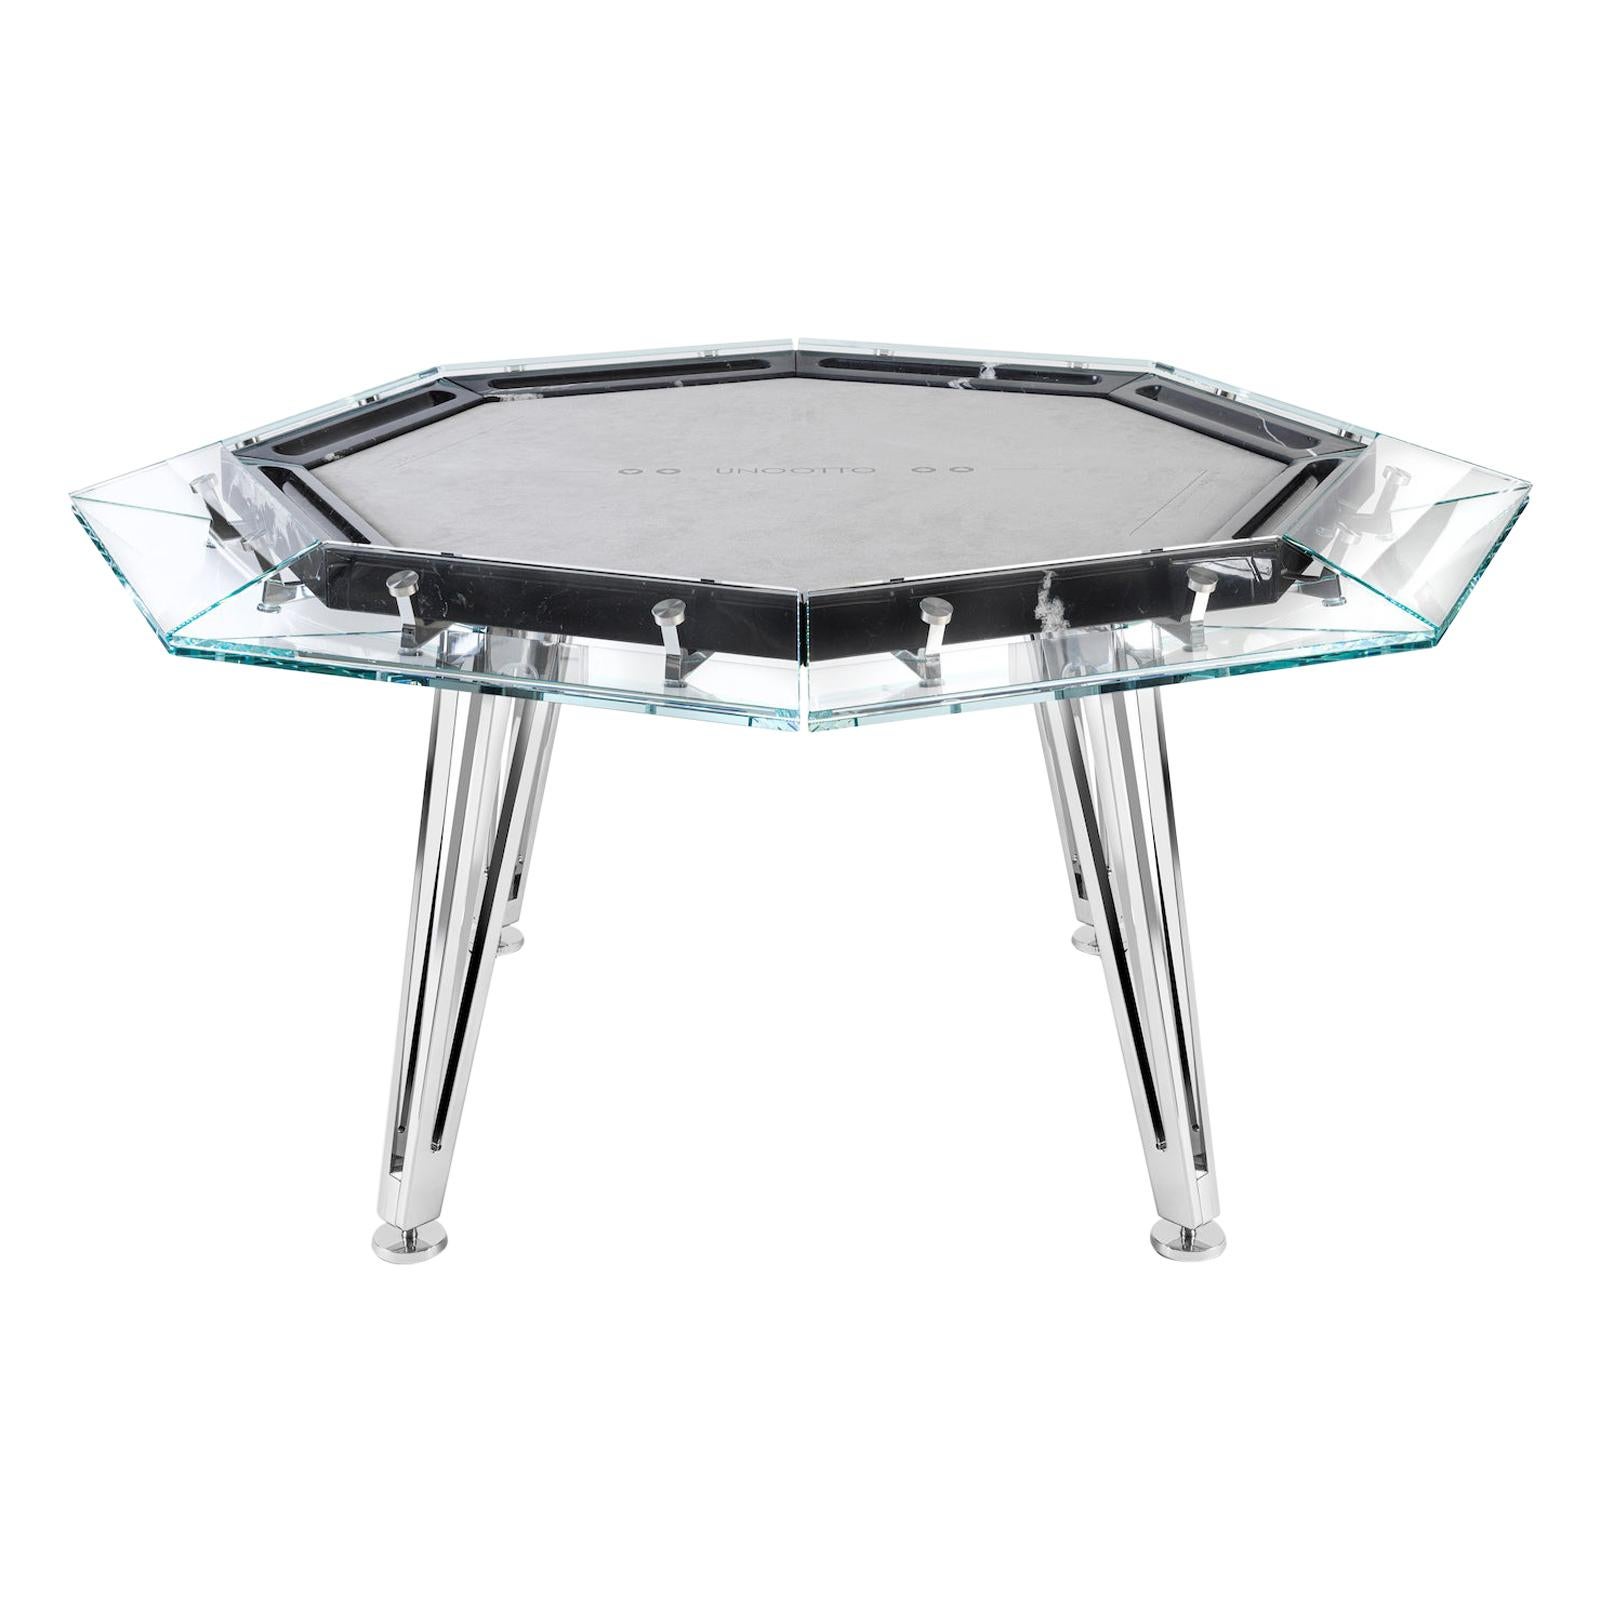 Unootto Marble, 8 Players, Contemporary Design Poker Table by Impatia